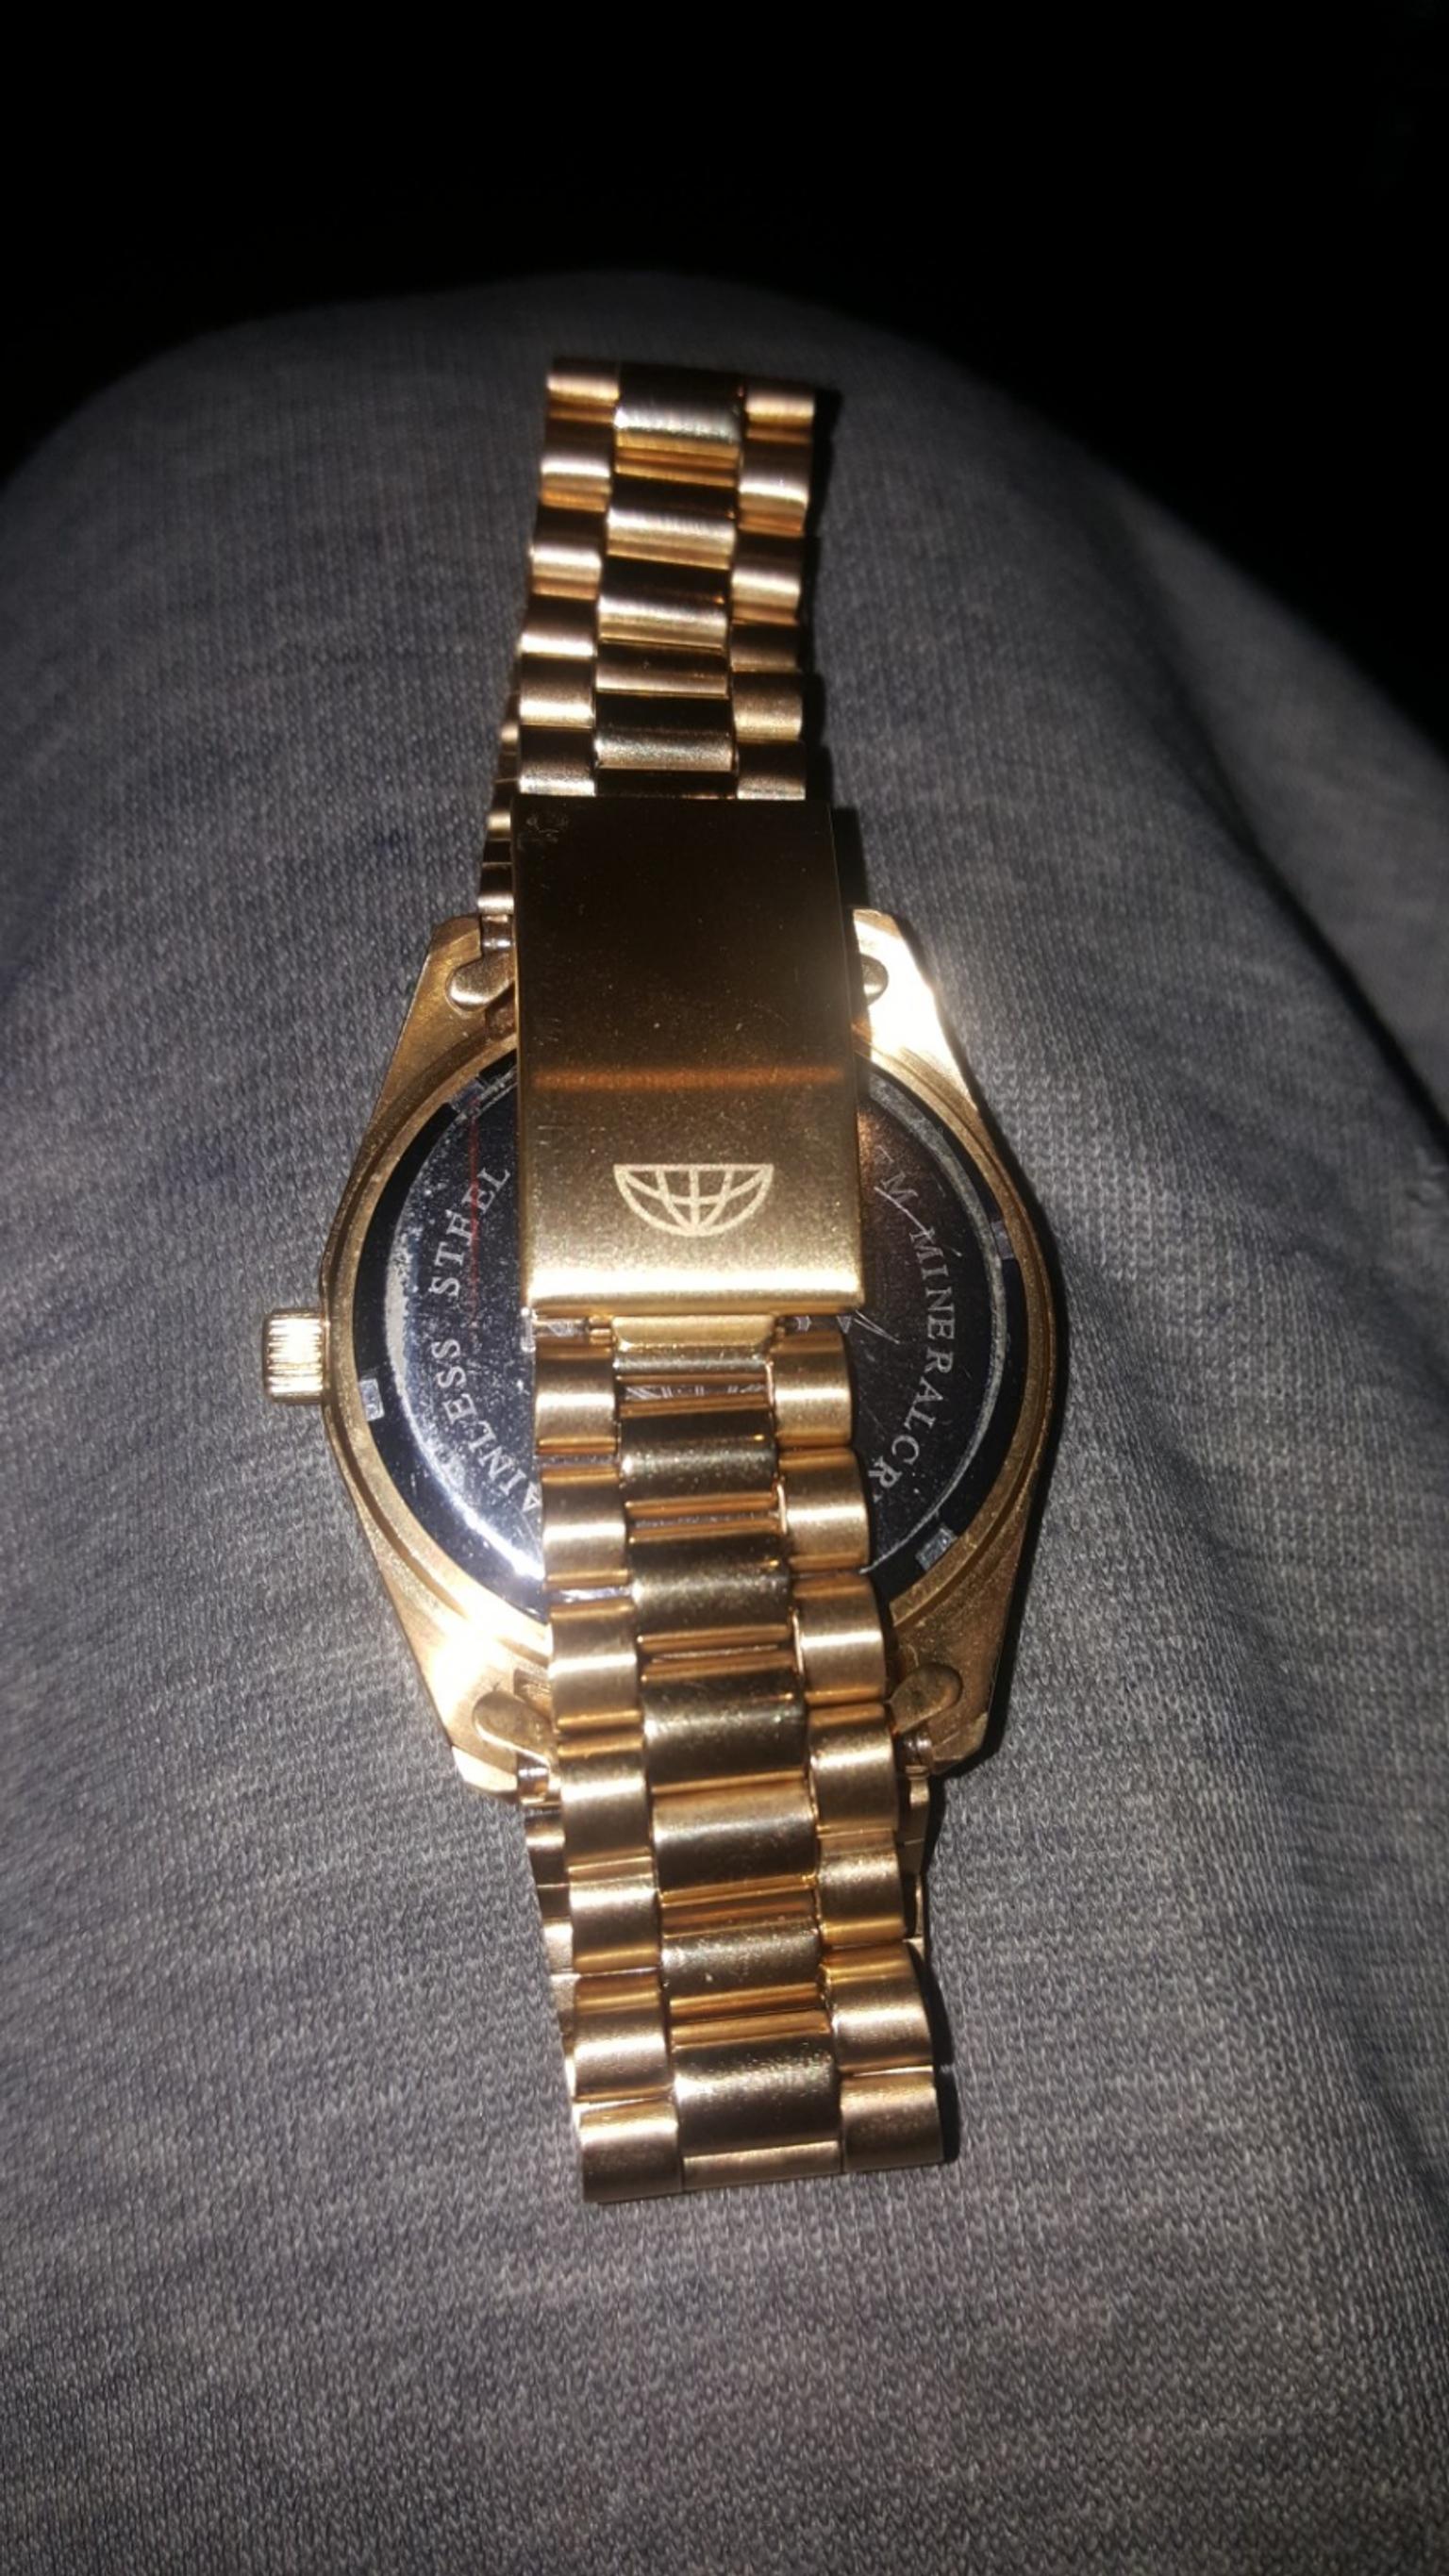 a astron man gold plated watch for sale £20po in SS5 Rochford for £20. ...